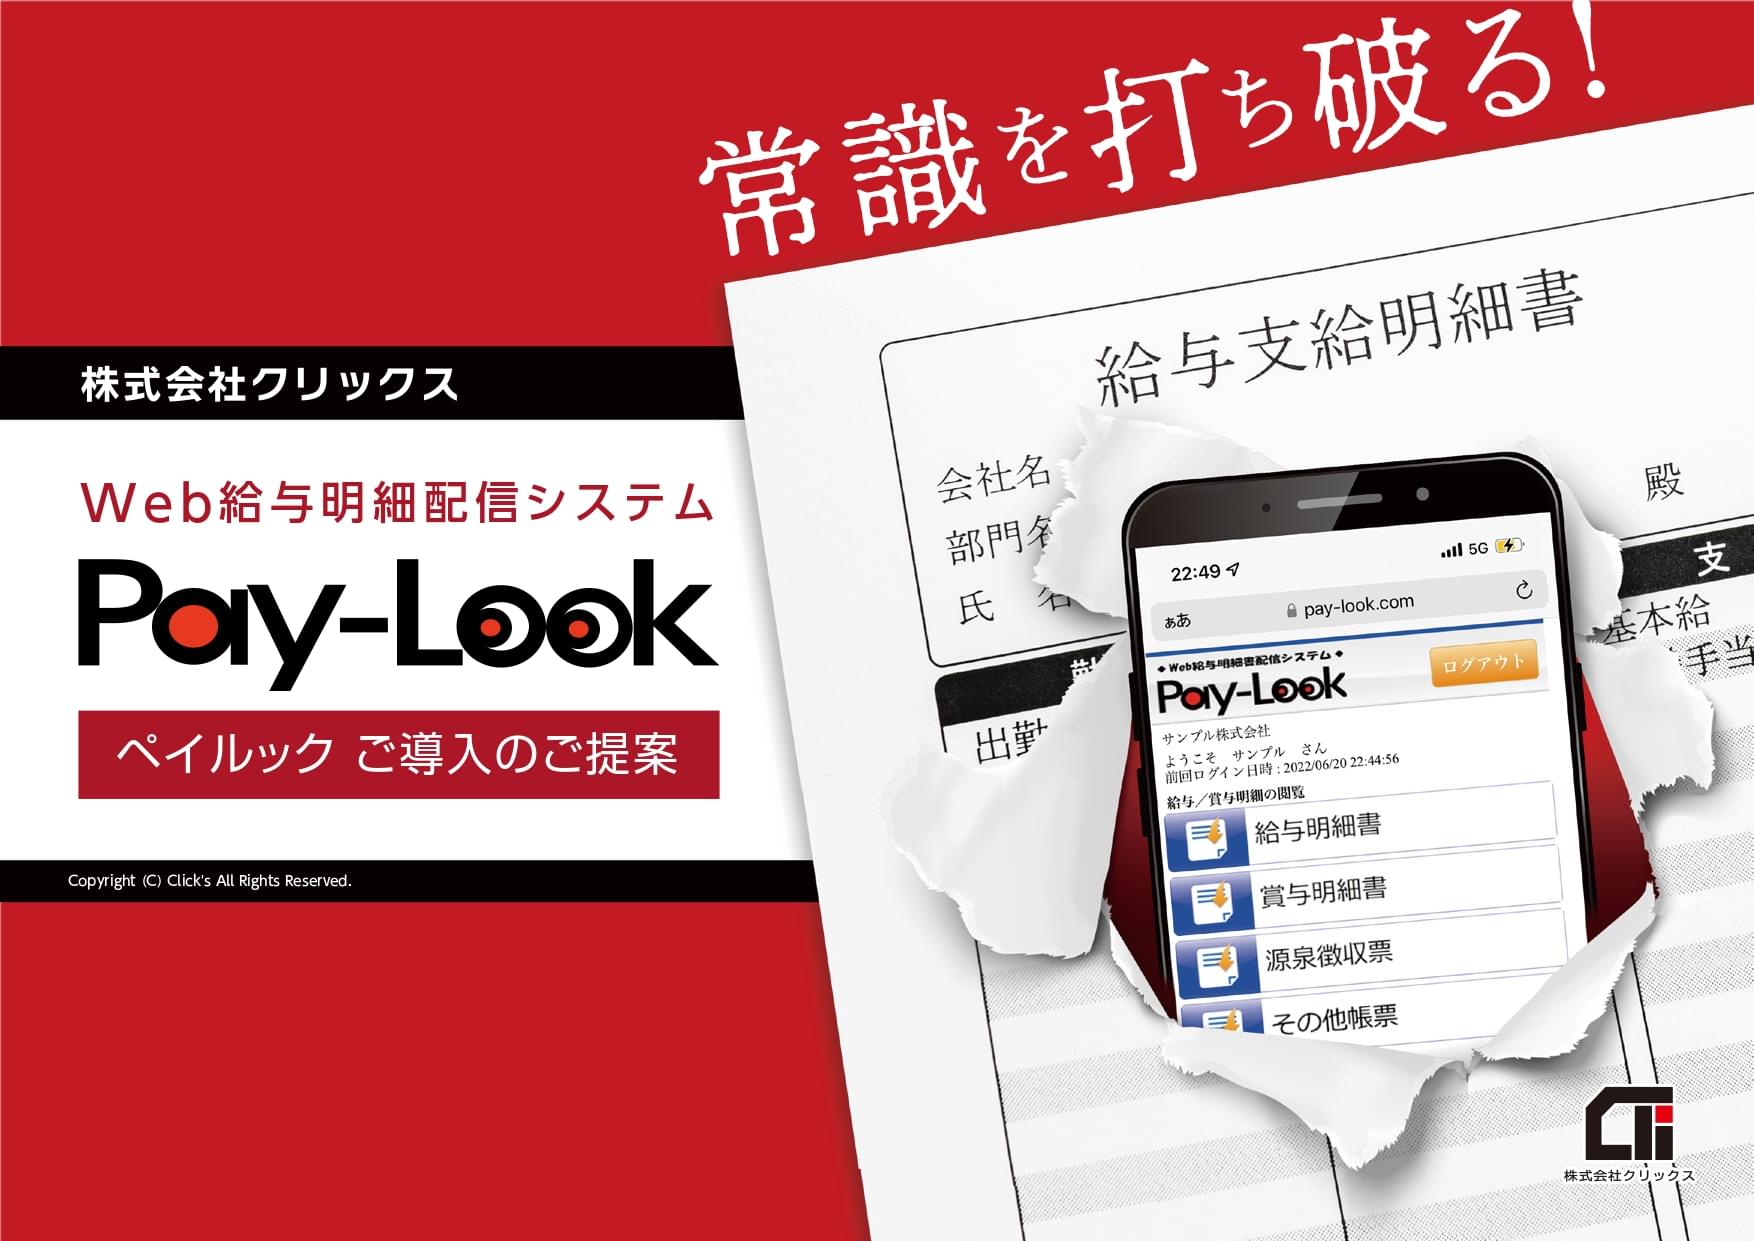 Pay-Look